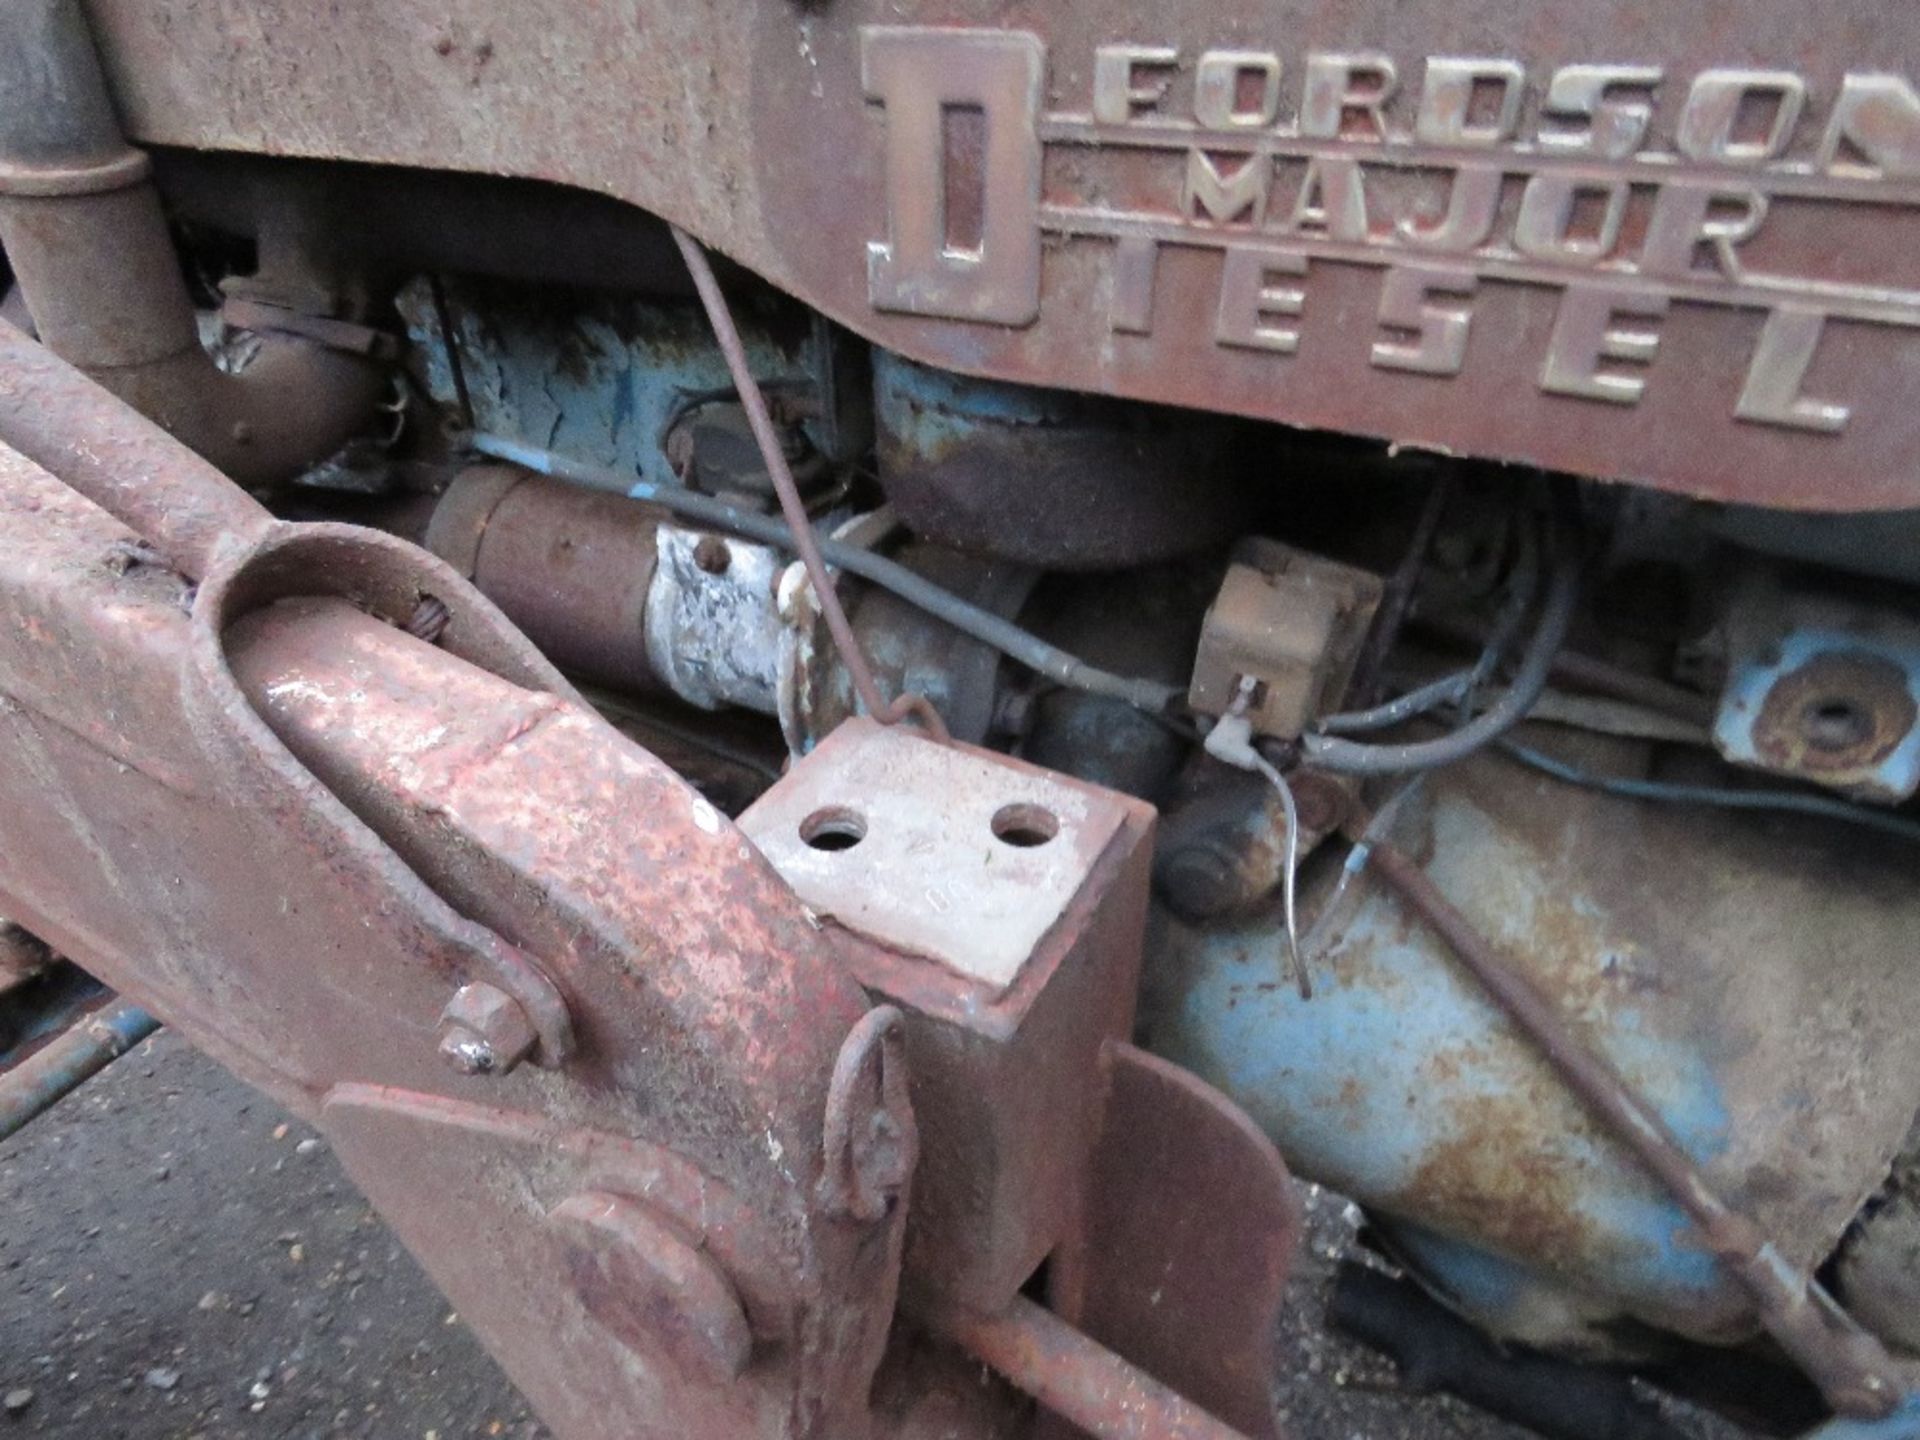 FORDSON POWER MAJOR TRACTOR WITH LOADER. NO LOG BOOK. BEEN STANDING FOR MANY YEARS. UNTESTED. THIS L - Image 7 of 10